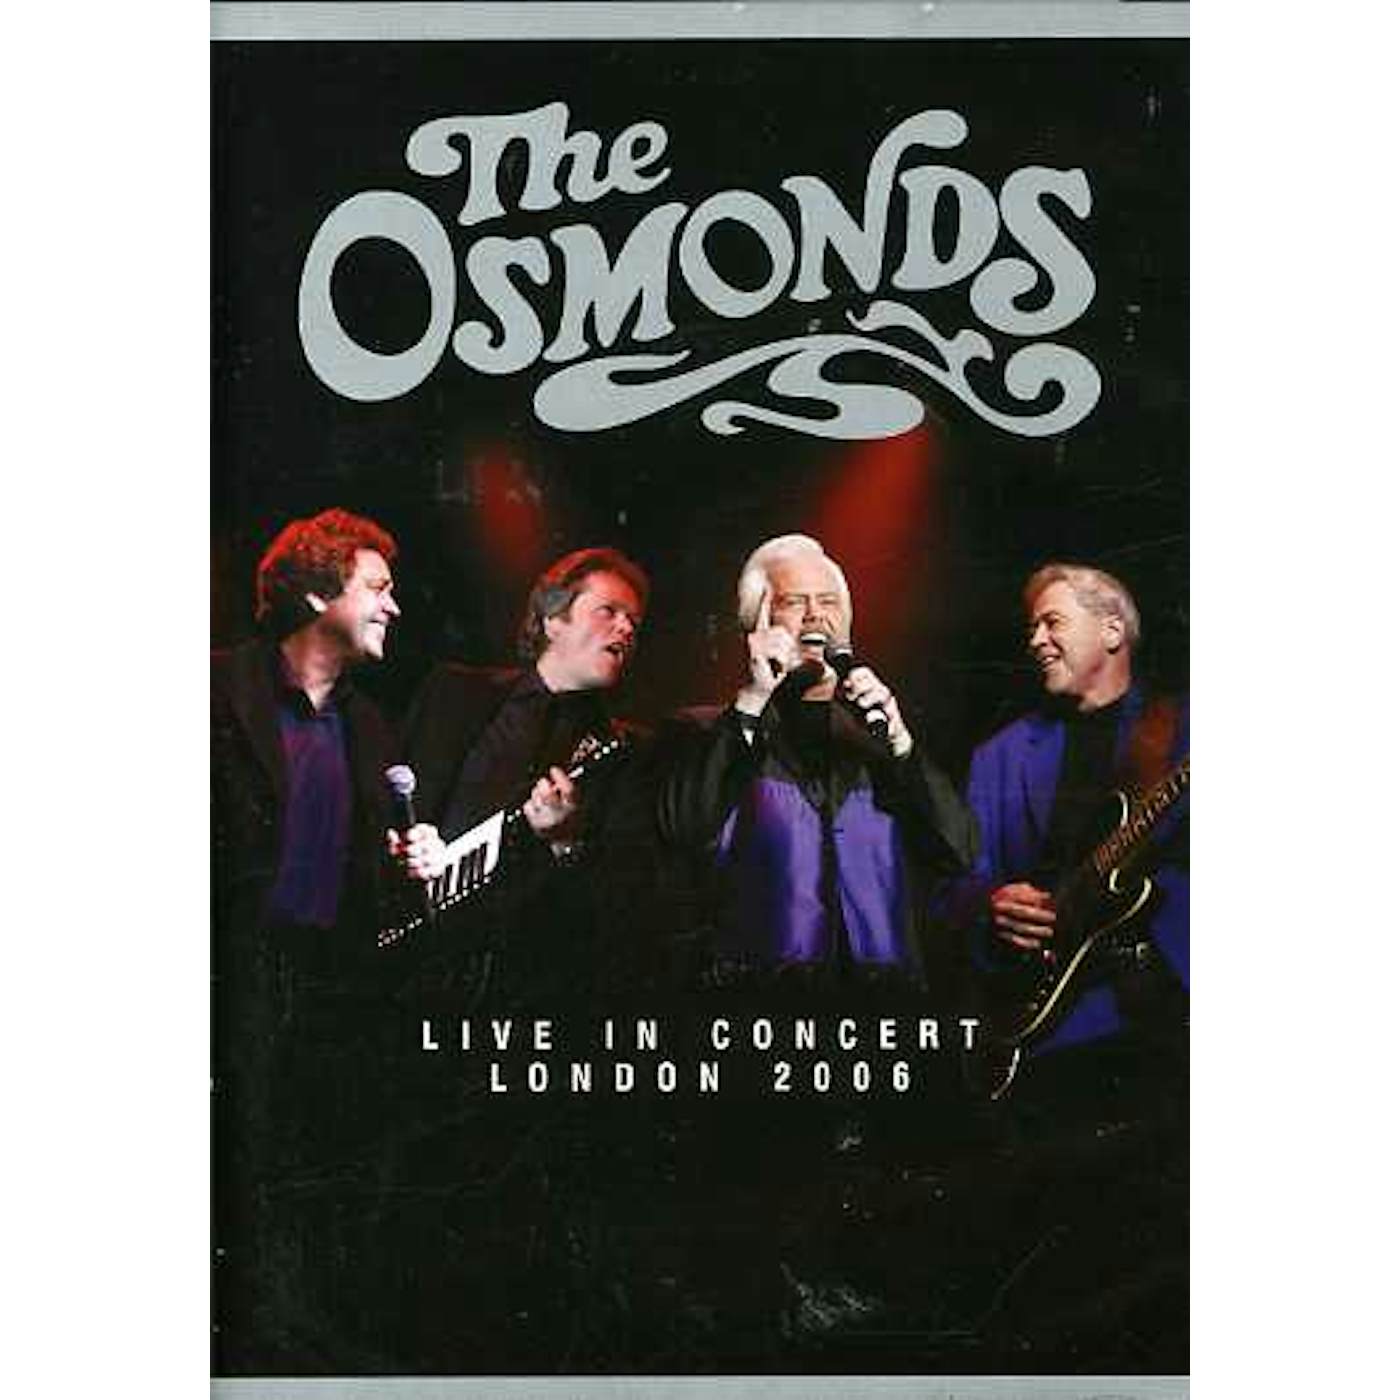 The Osmonds LIVE IN CONCERT DVD